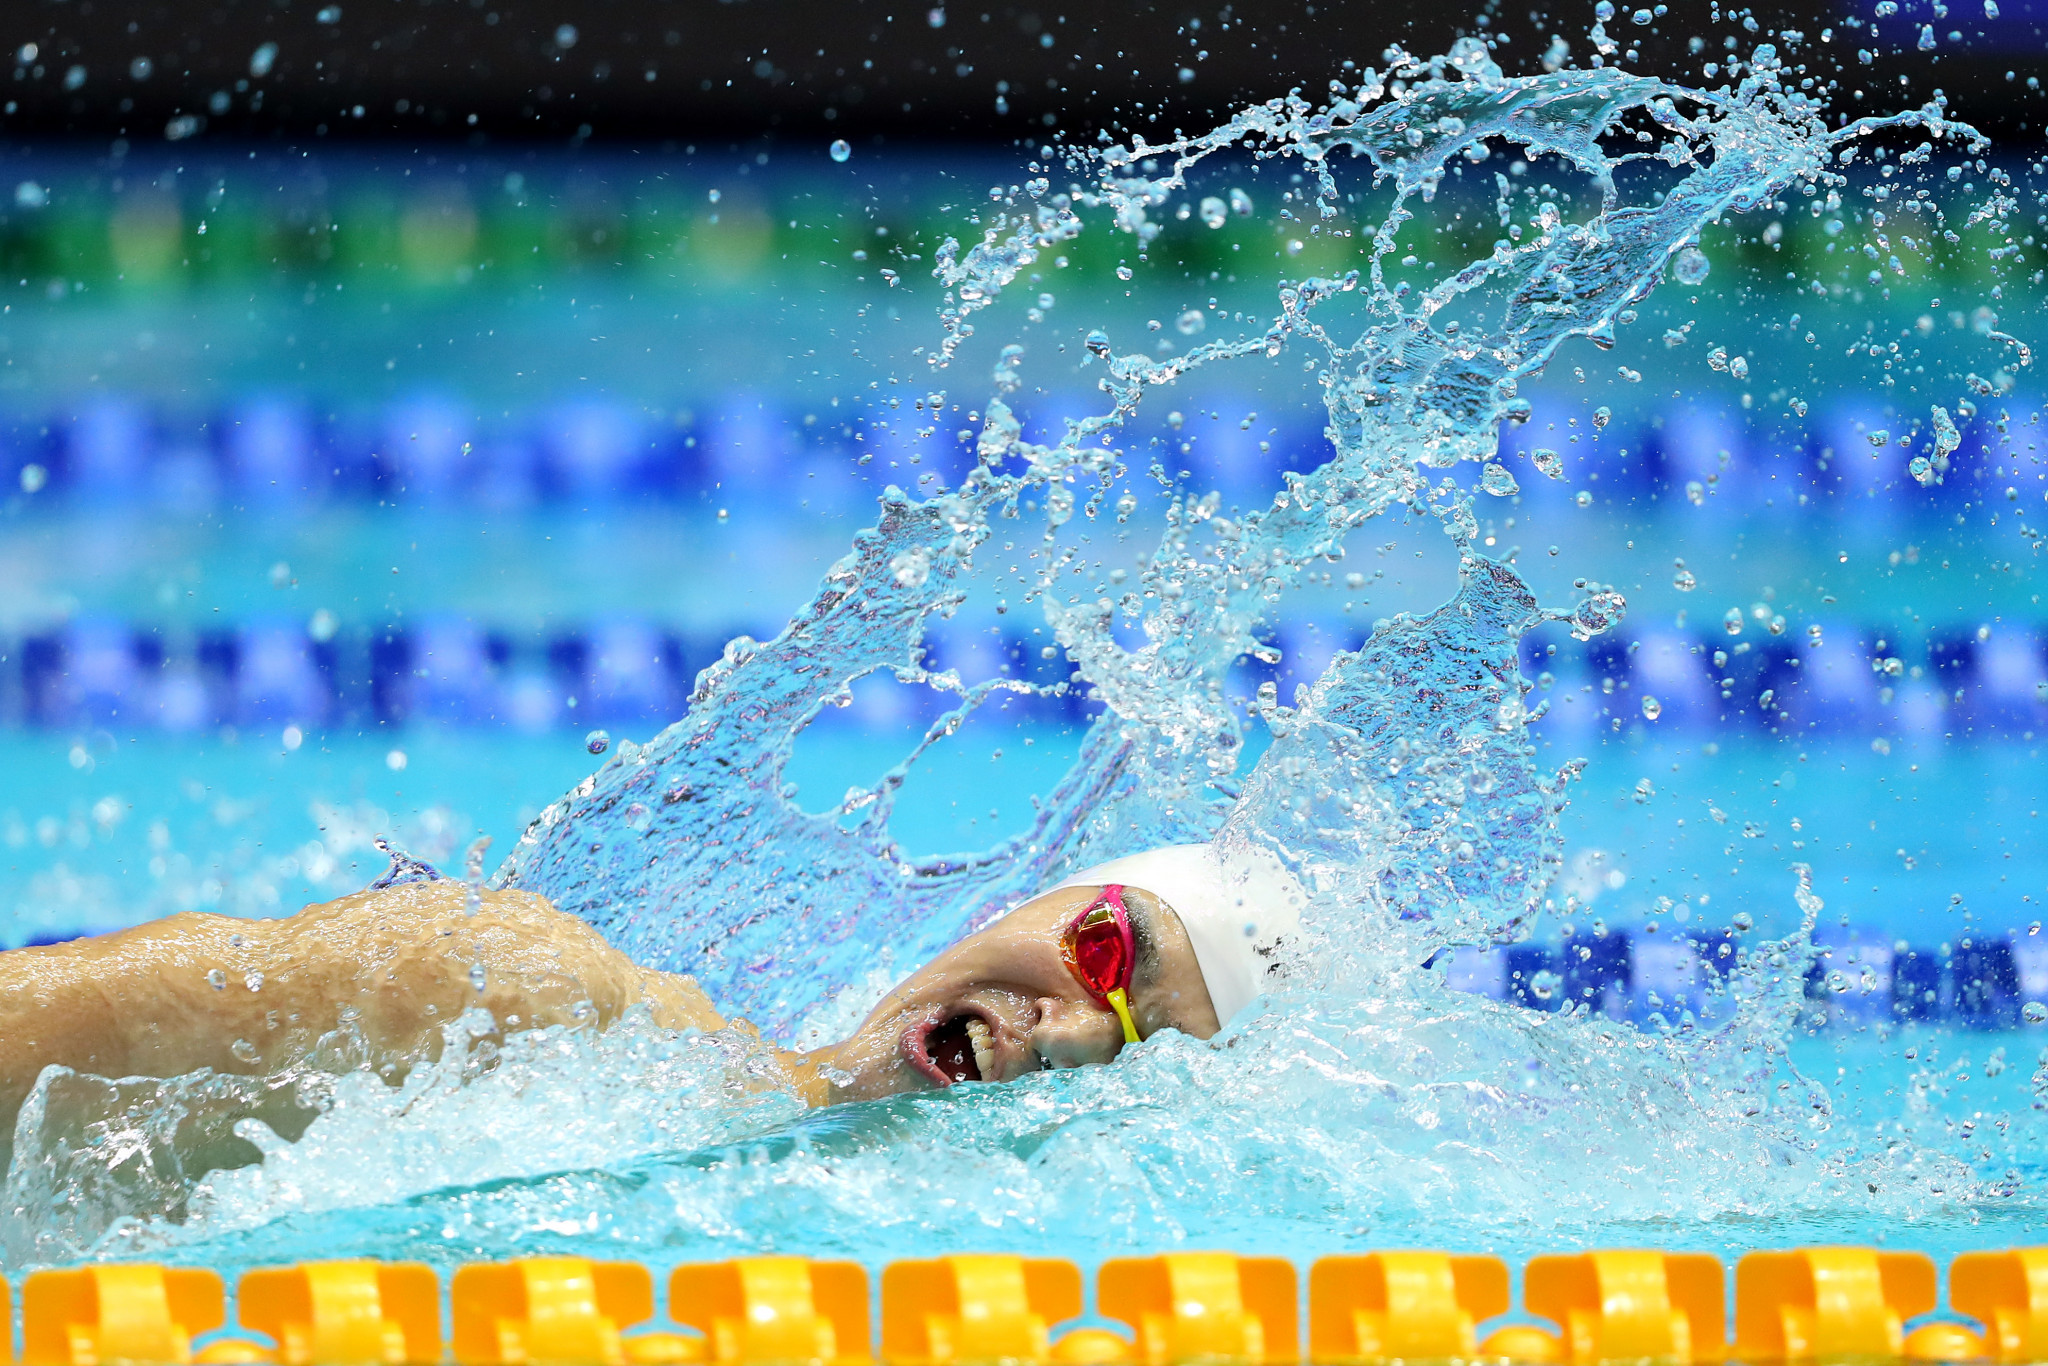 Chinese swimmer Sun Yang revealed his goal to top the podium at the Tokyo 2020 Olympic Games ©Getty Images